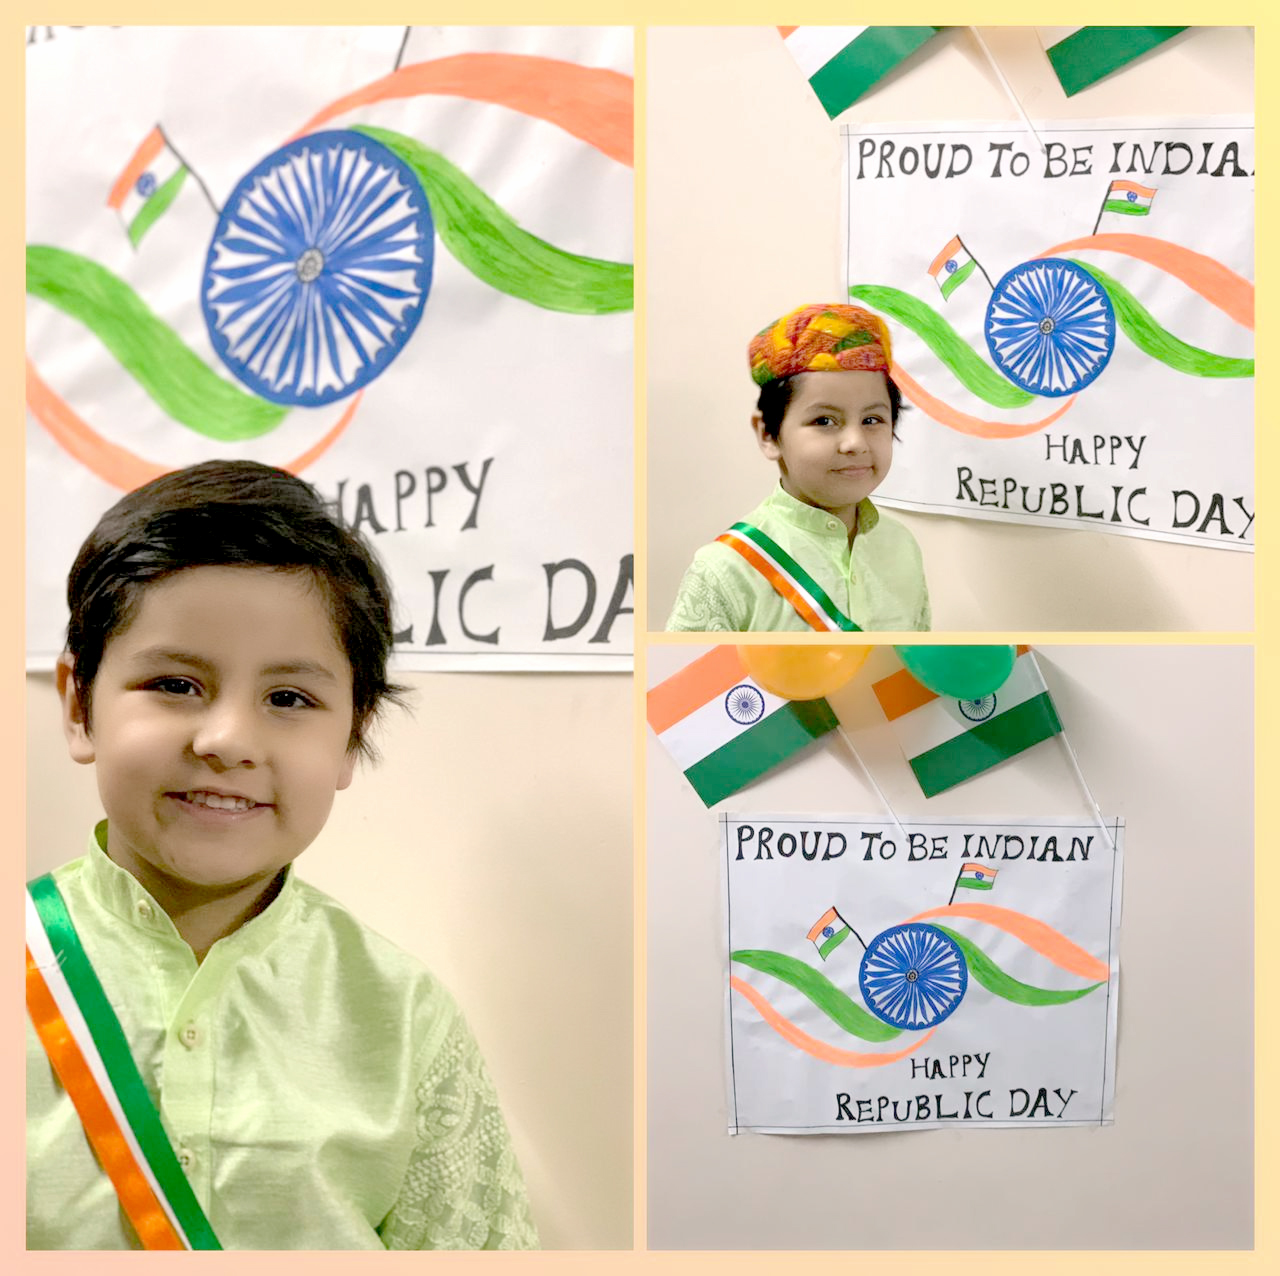 72nd REPUBLIC DAY OF INDIA 2021